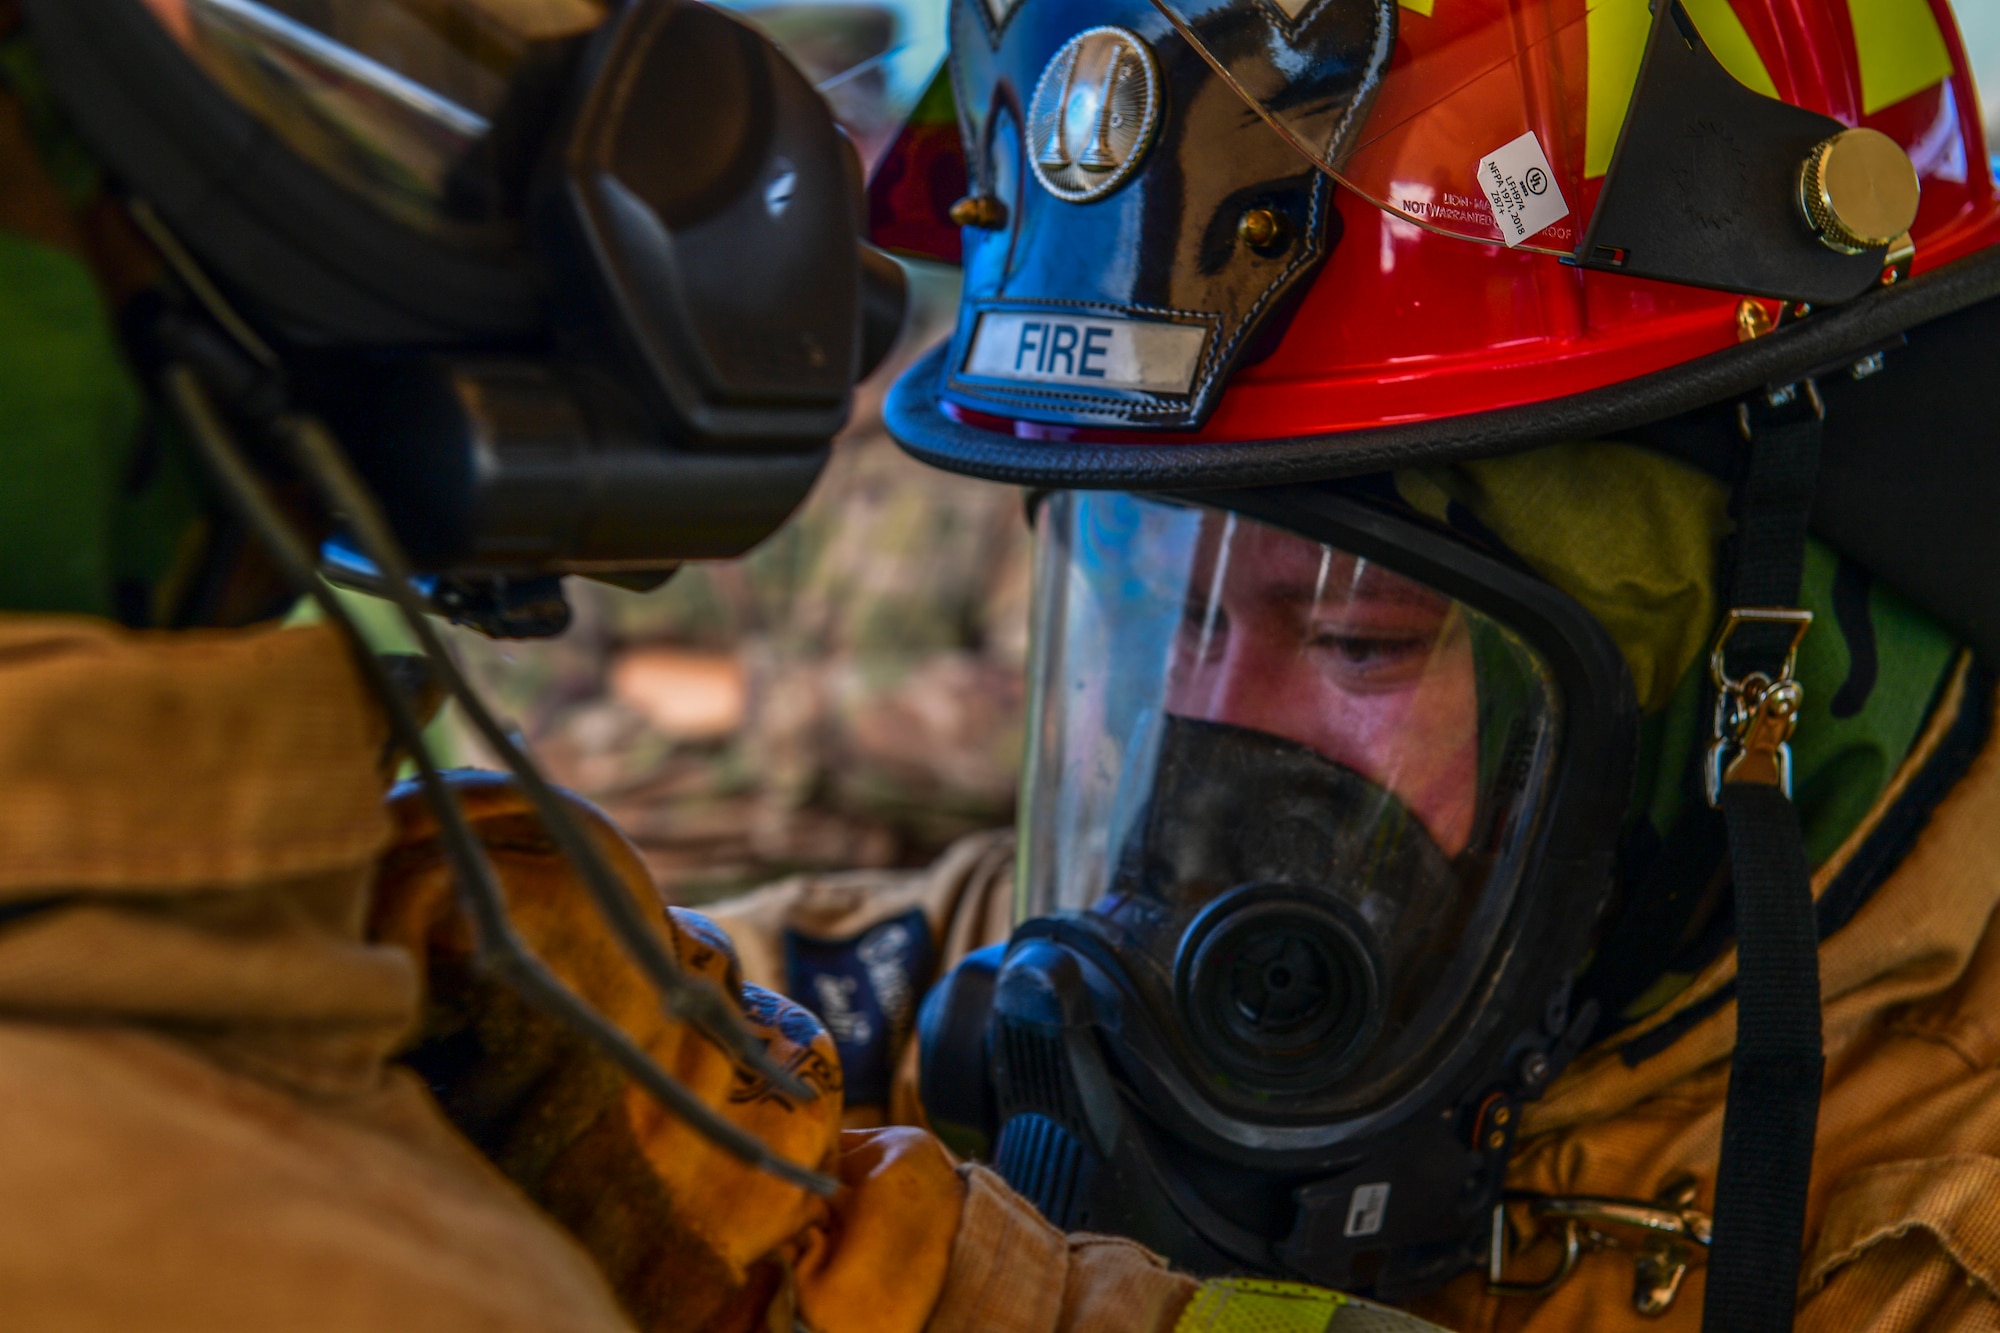 Tech. Sgt. John Mclauglin, station captain with the 171st Fire Emergency Services, unclasps the neck of a fire suit worn by Staff Sgt. Scott Frederick, crew chief with the 171st Fire Emergency Services, during decontamination training in Coraopolis, Pennsylvania, September 8, 2019.